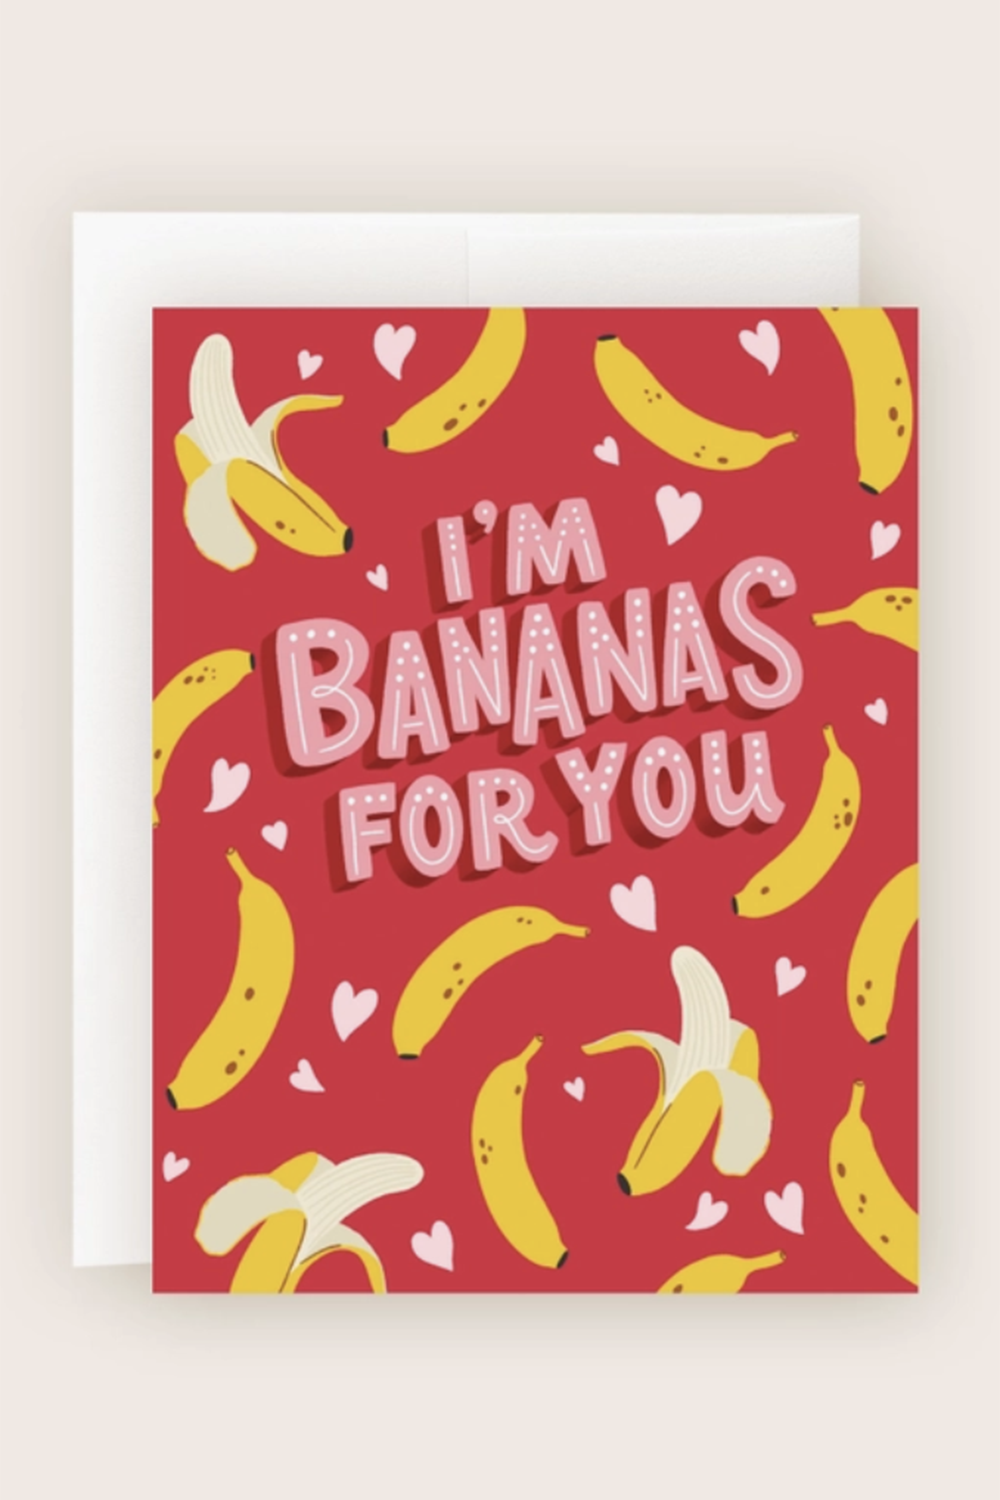 Pea Valentine's Day Card - Bananas for You